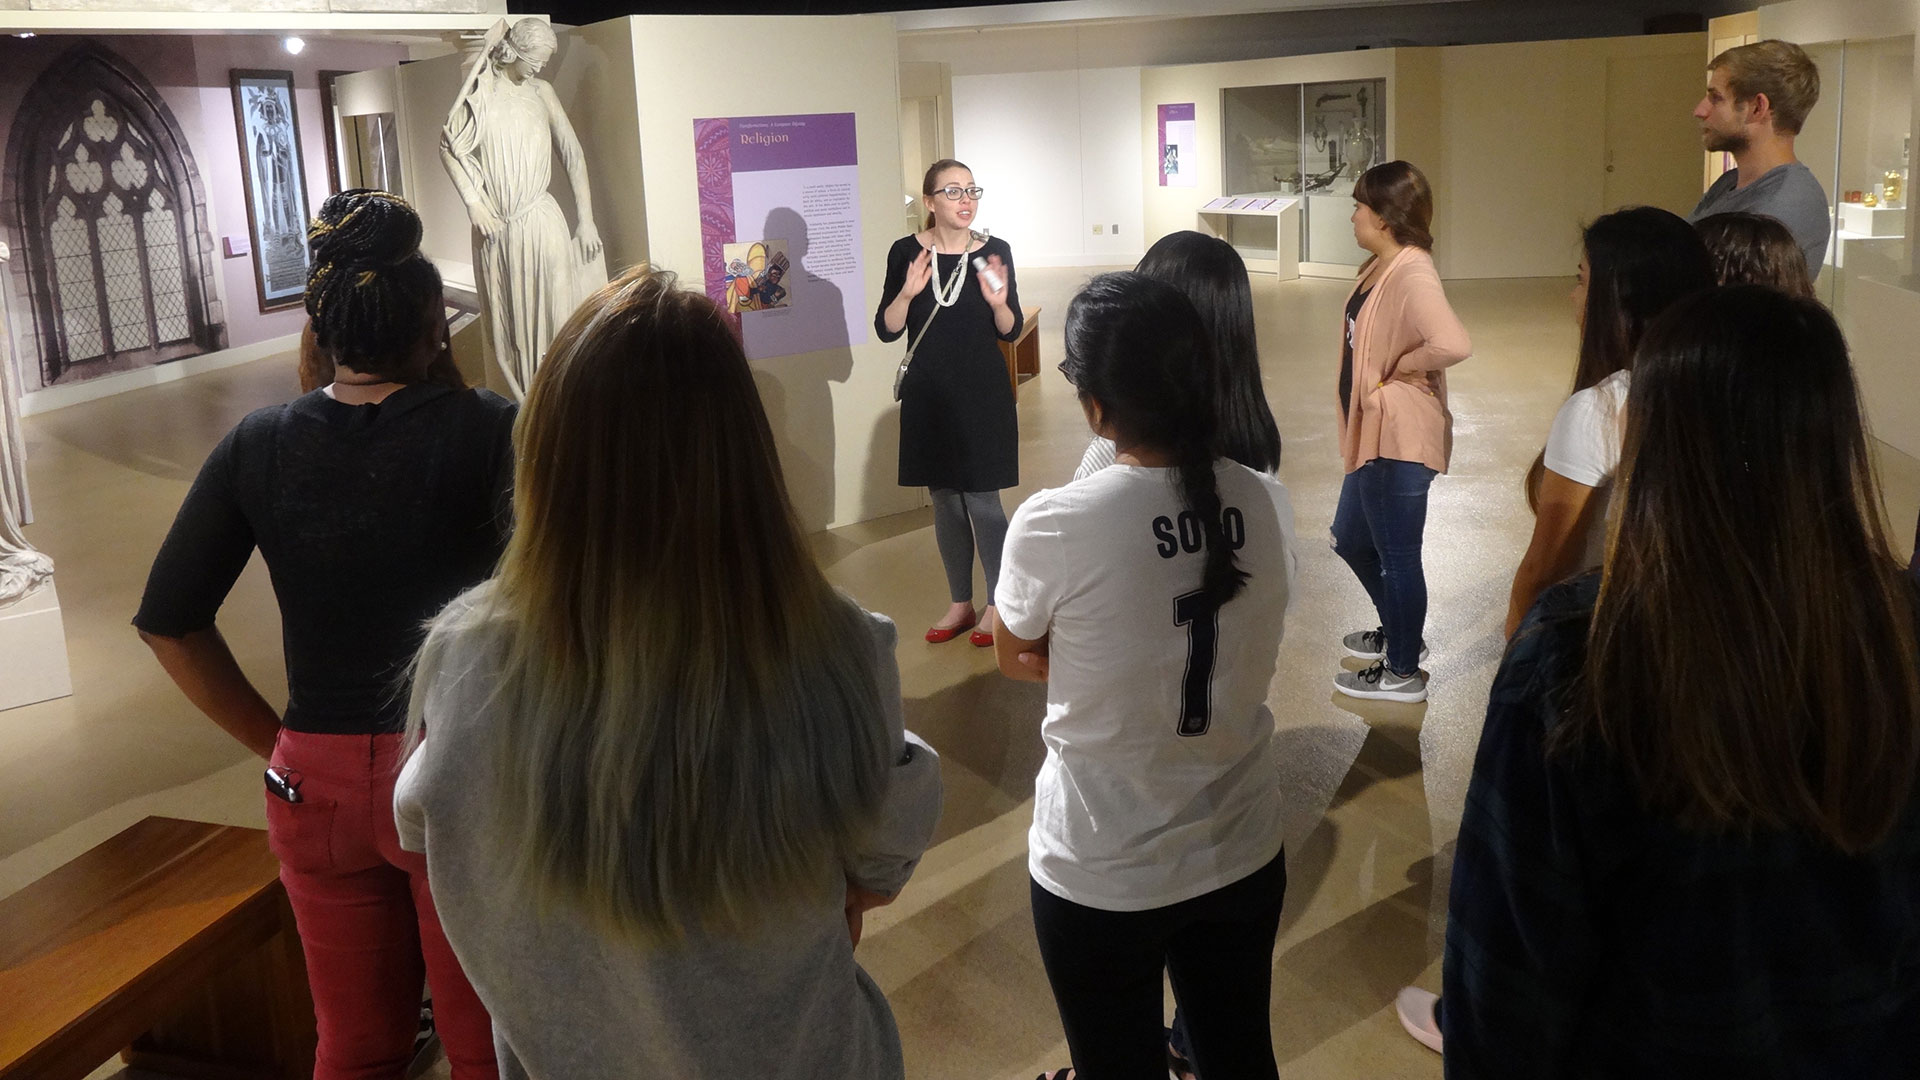 Museum guide gives tour to students in Europe gallery